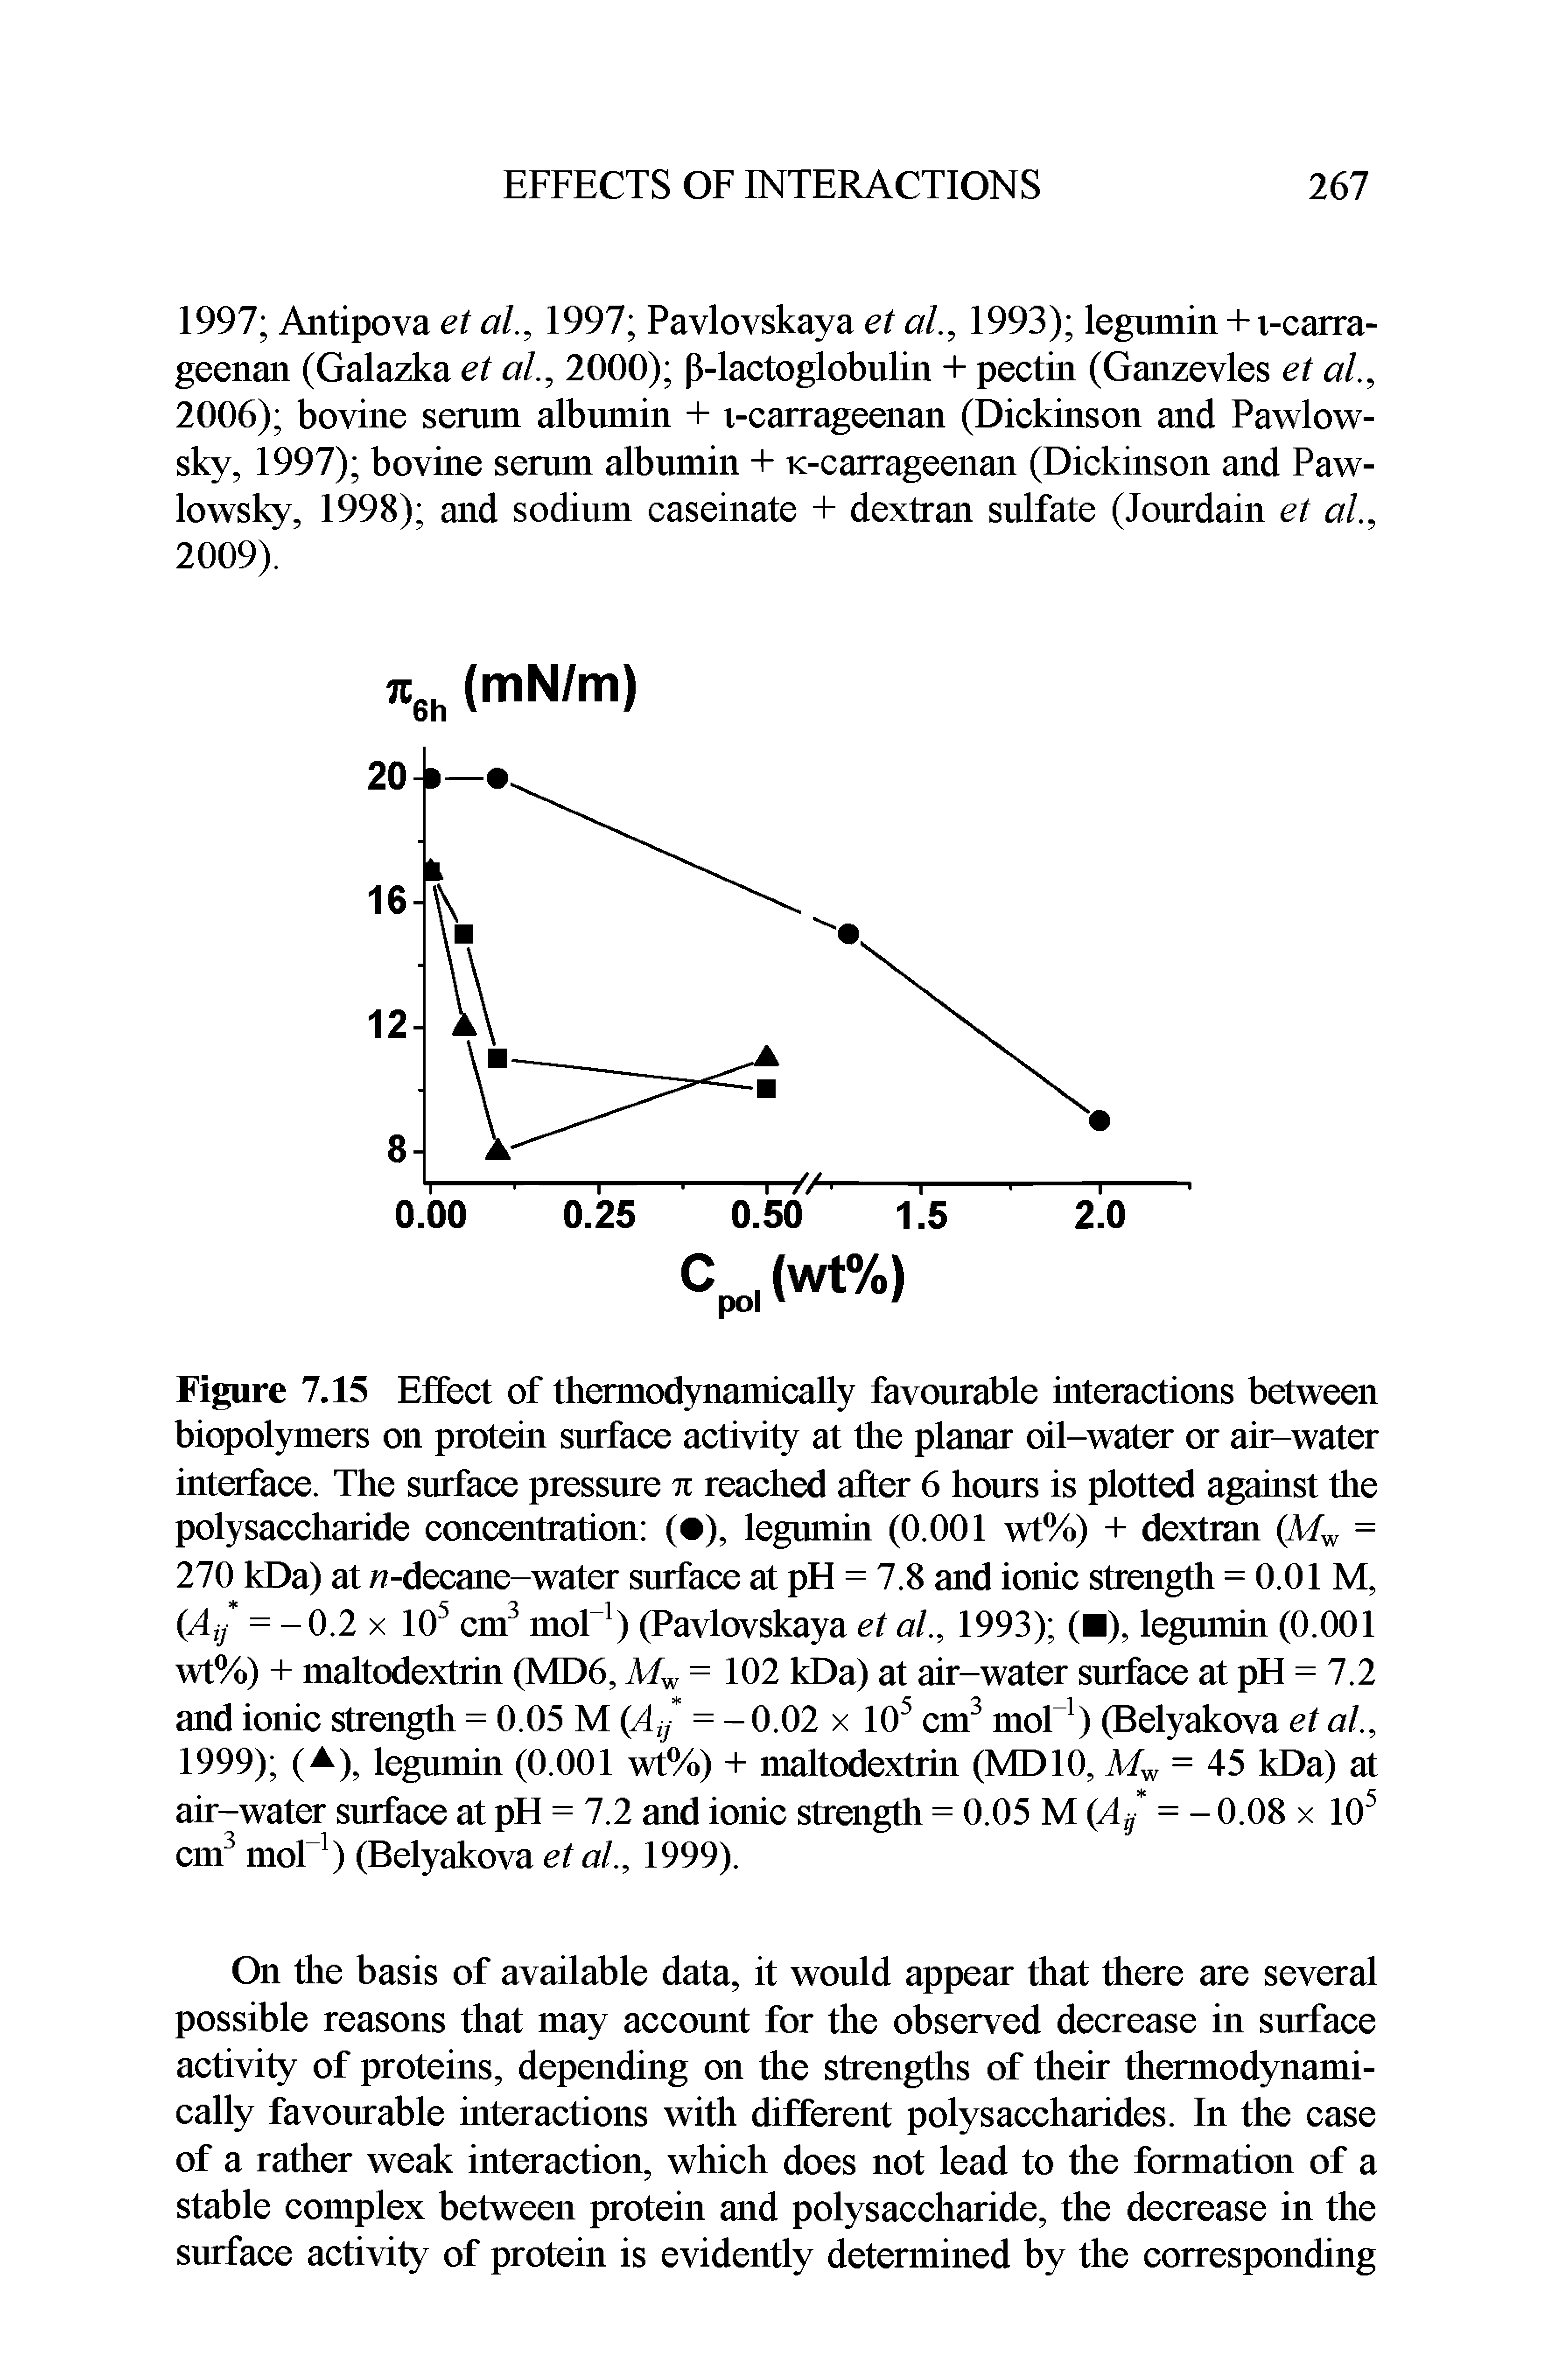 Figure 7.15 Effect of thermodynamically favourable interactions between biopolymers on protein surface activity at the planar oil-water or air-water interface. The surface pressure n reached after 6 hours is plotted against the polysaccharide concentration ( ), legumin (0.001 wt%) + dextran (Mw = 270 kDa) at / -decane-water surface at pH = 7.8 and ionic strength = 0.01 M, (Ay = -0.2 x 105 cm3 mol1) (Pavlovskaya et ah, 1993) ( ), legumin (0.001 wt%) + maltodextrin (MD6, Mw = 102 kDa) at air-water surface at pH = 7.2 and ionic strength = 0.05 M (Ay = - 0.02 x 105 cm3 mol-1) (Belyakova et ah, 1999) (A), legumin (0.001 wt%) + maltodextrin (MD10, Mw = 45 kDa) at air-water surface at pH = 7.2 and ionic strength = 0.05 M (.1 / = - 0.08 x 105 cm3 mol-1) (Belyakova et ah, 1999).